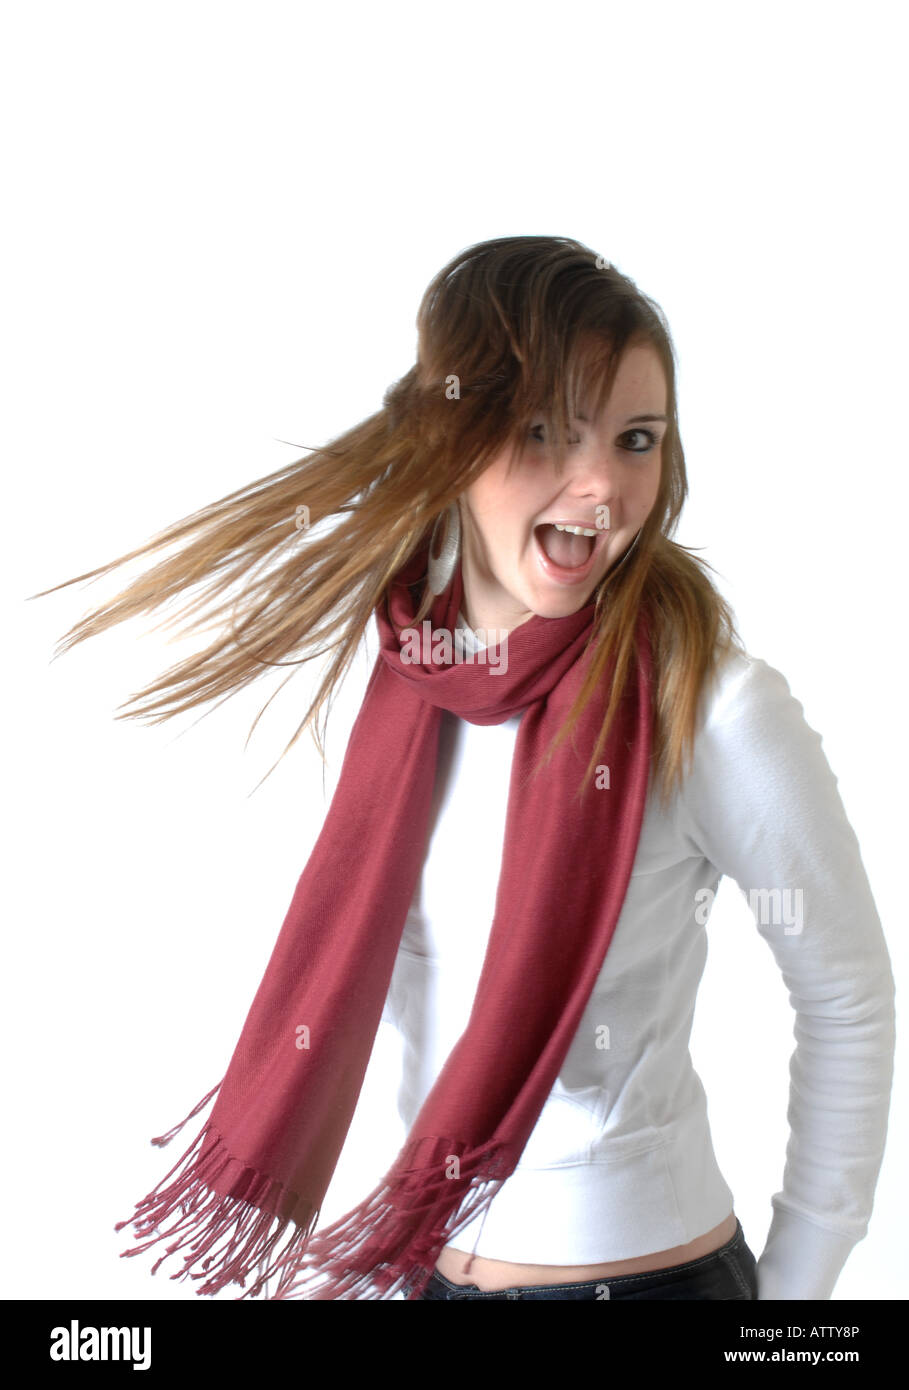 A generic photograph of a teenage girl shaking her hair Stock Photo